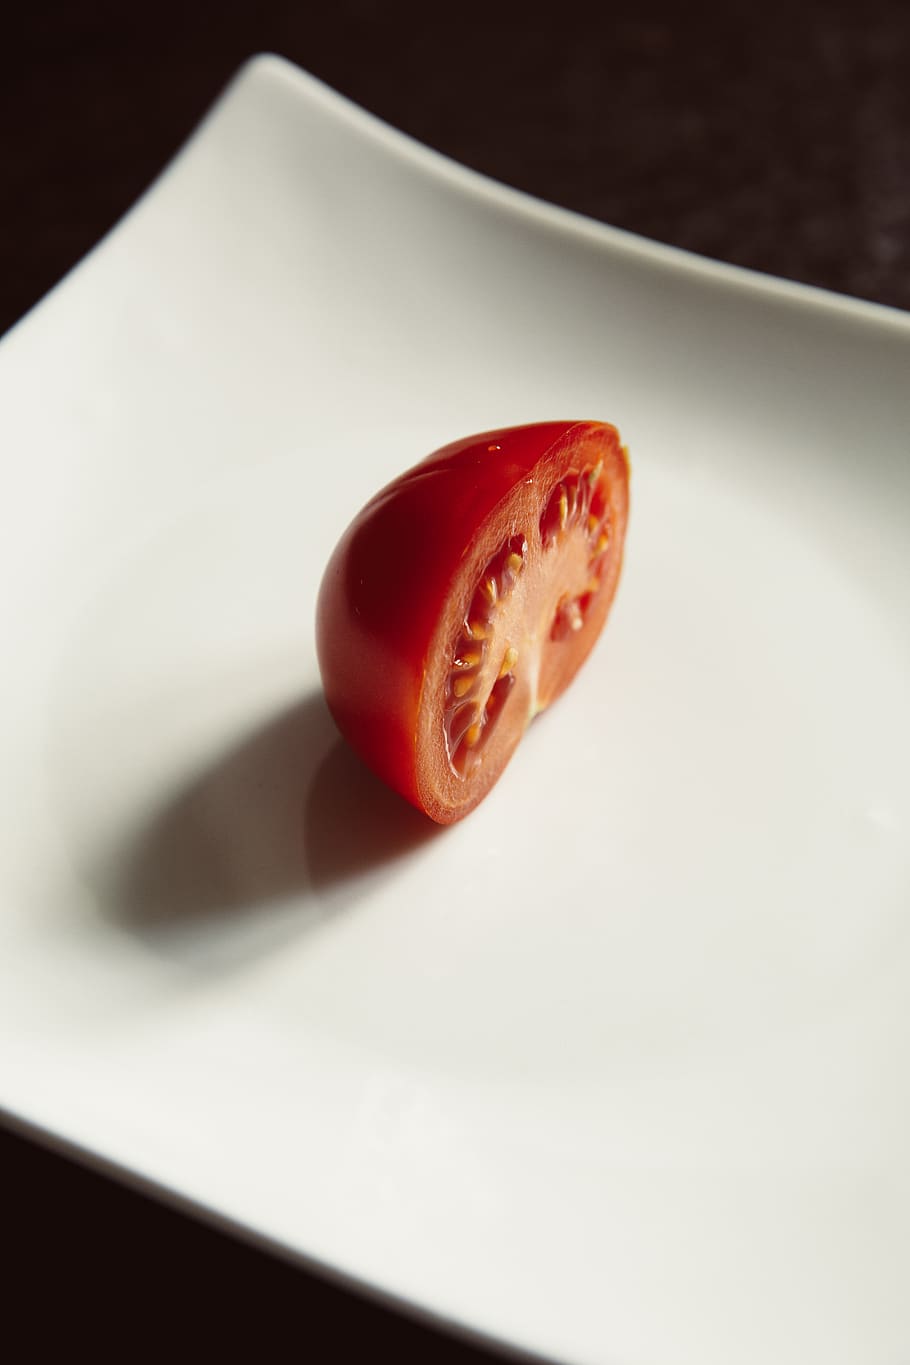 white, plate, red, tomato, food, vegetable, fruit, healthy eating, food and drink, wellbeing